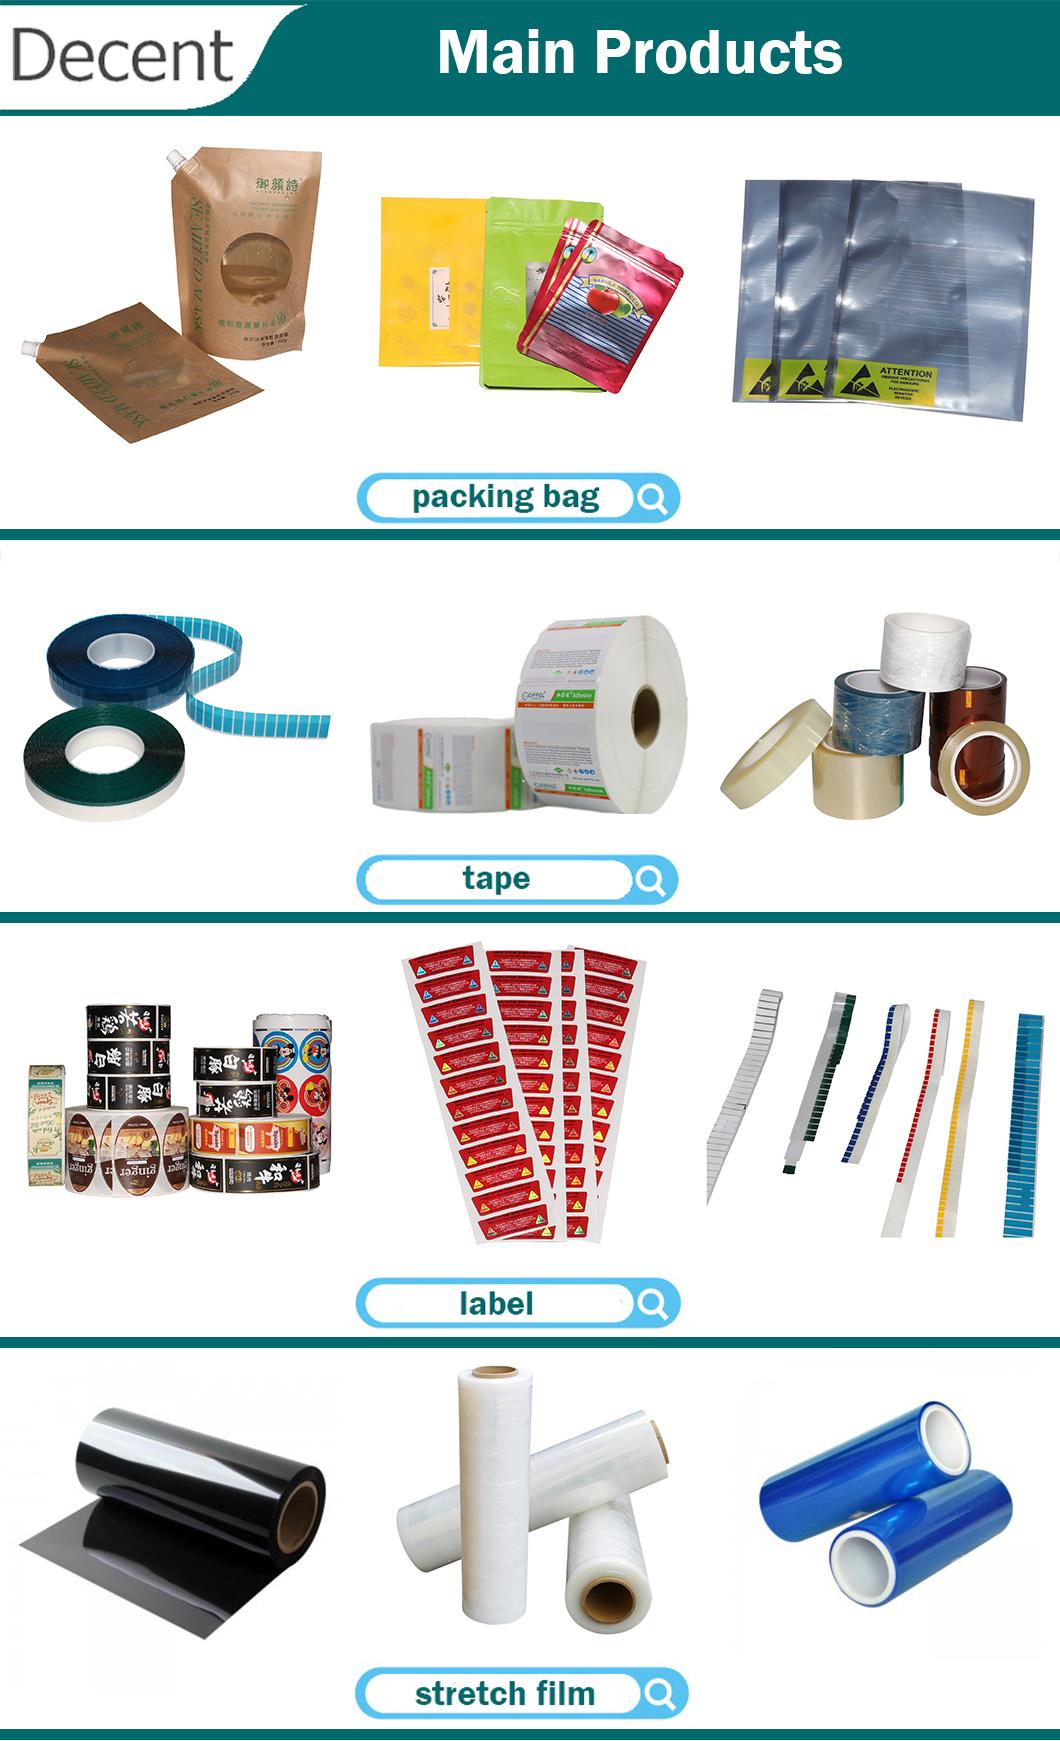 Environment-Friendly Auto Used Paper Crepe Tape for Masking Jumbo Roll Water-Based Washi Tape